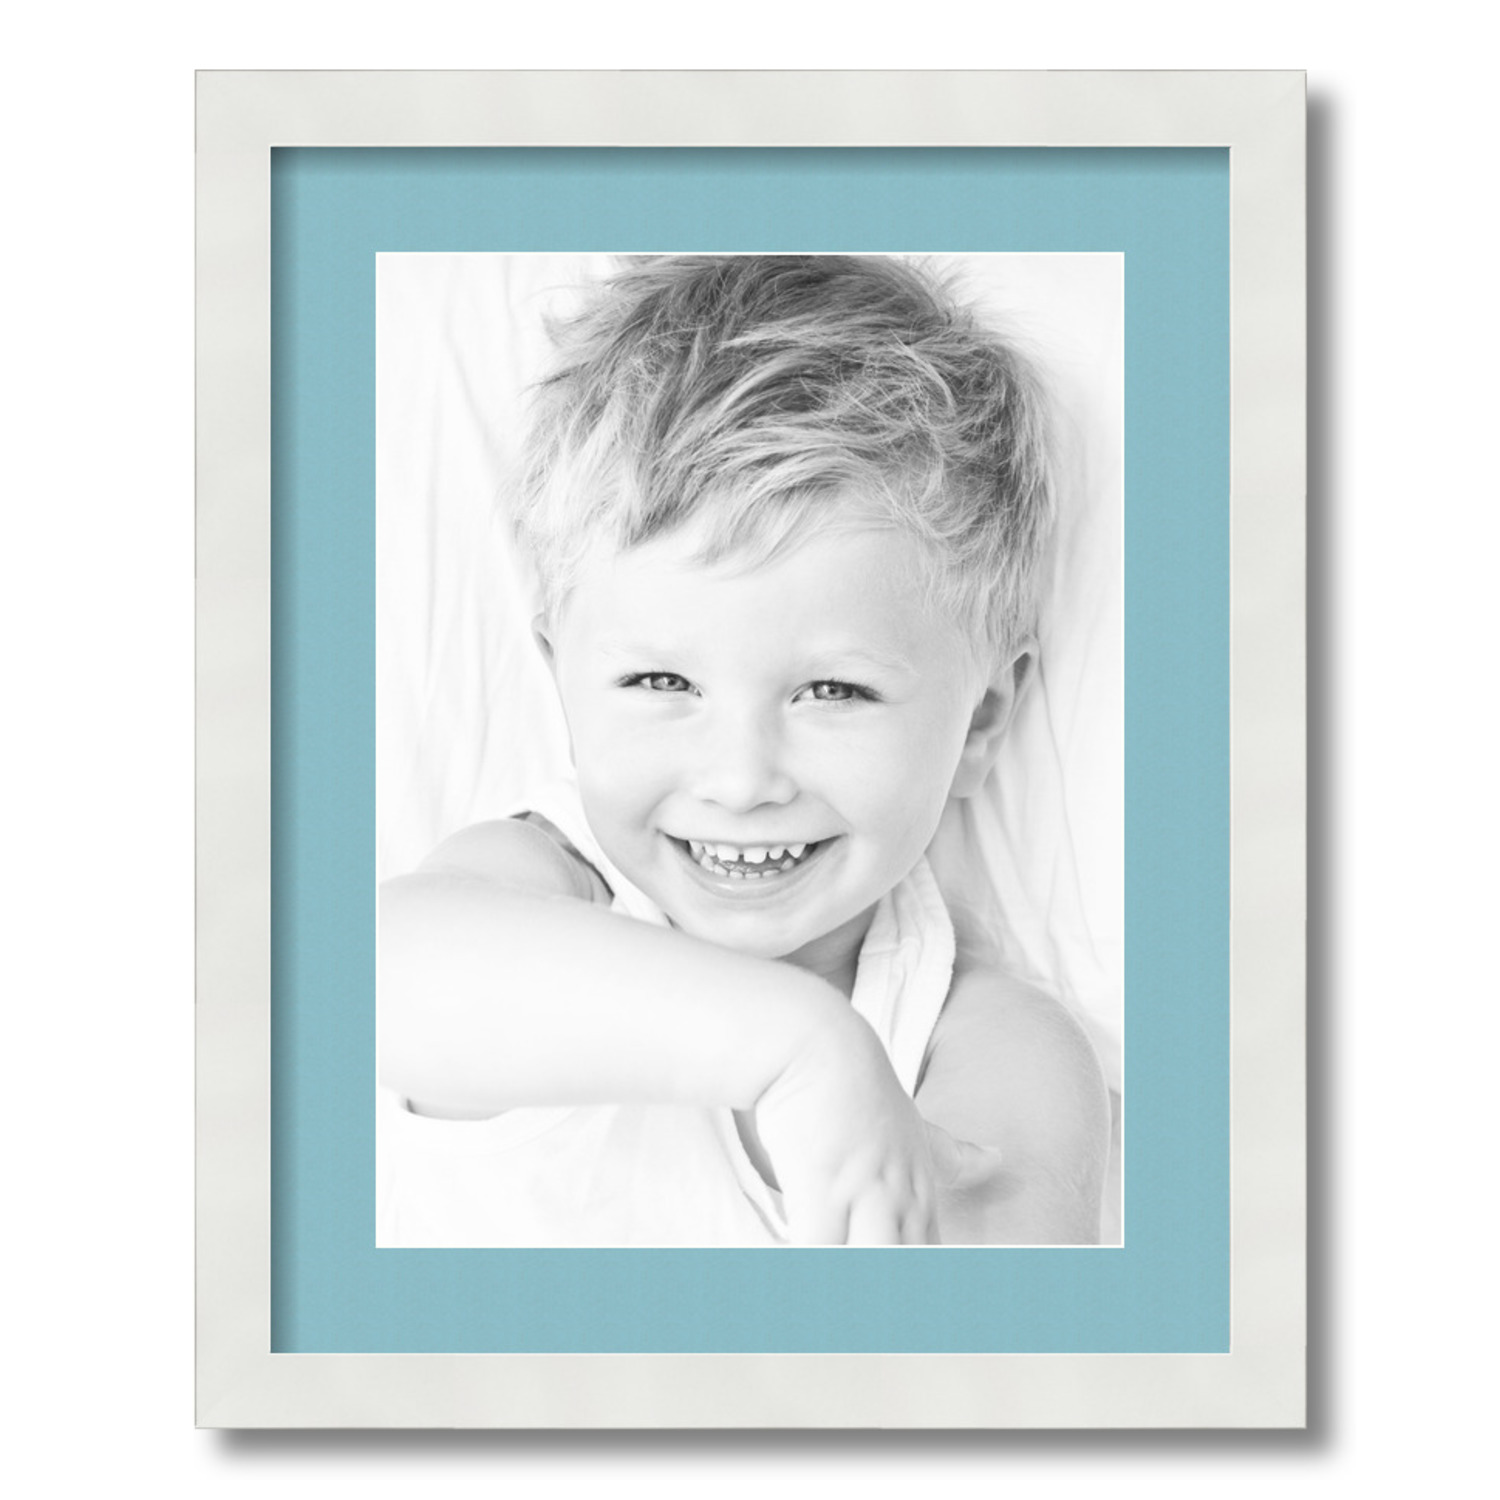 ArtToFrames 16x20 Matted Picture Frame with 12x16 Single Mat Photo Opening  Framed in 1.25 Satin White Frame and 2 French Blue Mat (FWM-3966-16x20)